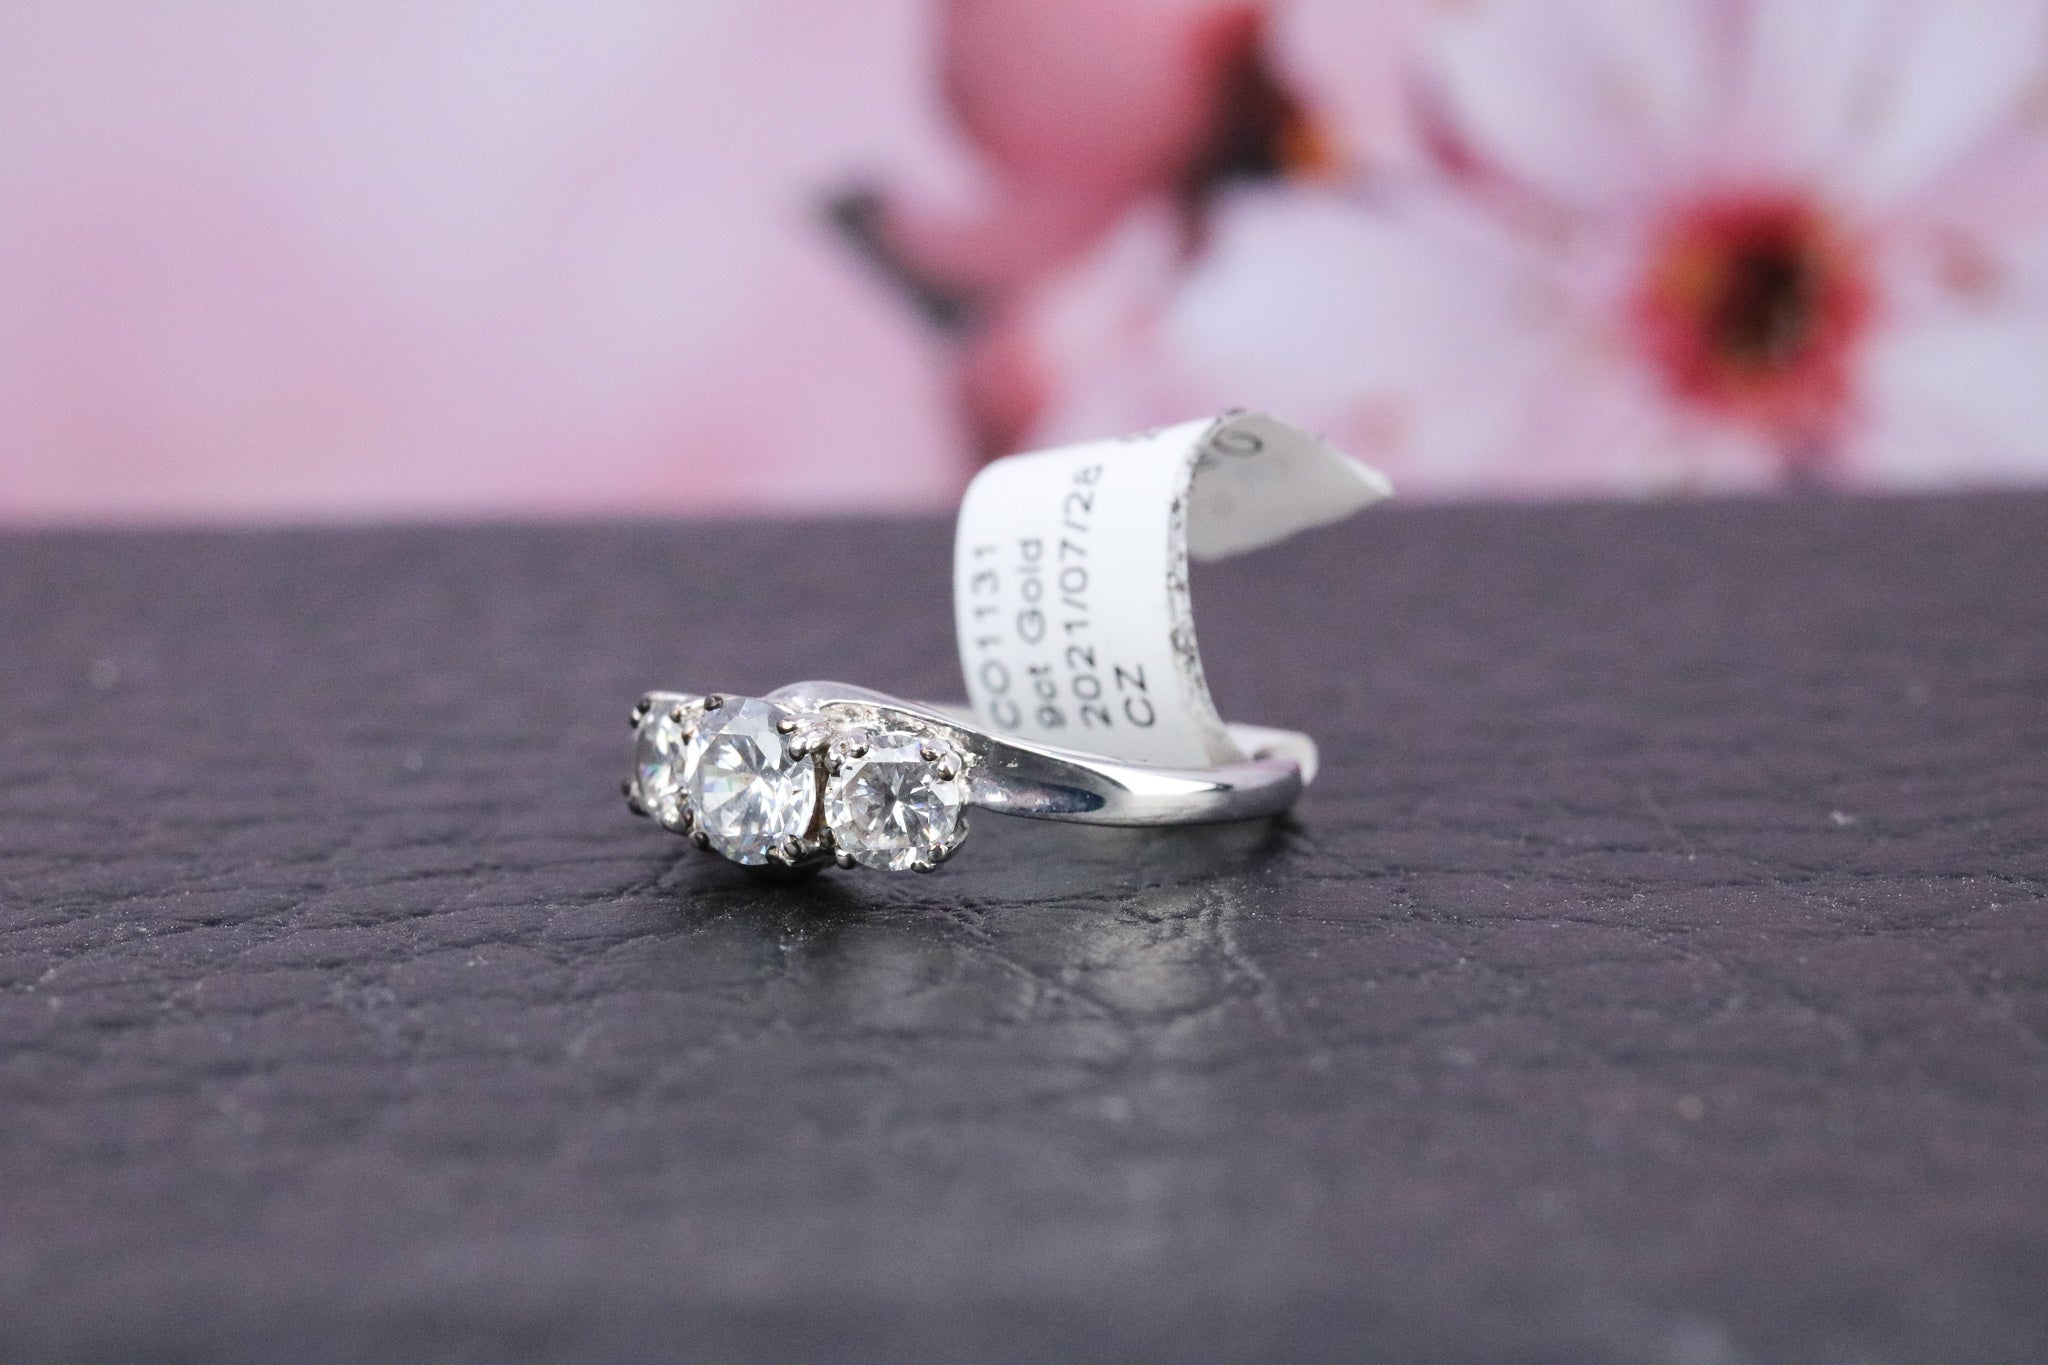 9ct White Gold Cubic Zirconia Ring - CO1131 - Hallmark Jewellers Formby & The Jewellers Bench Widnes